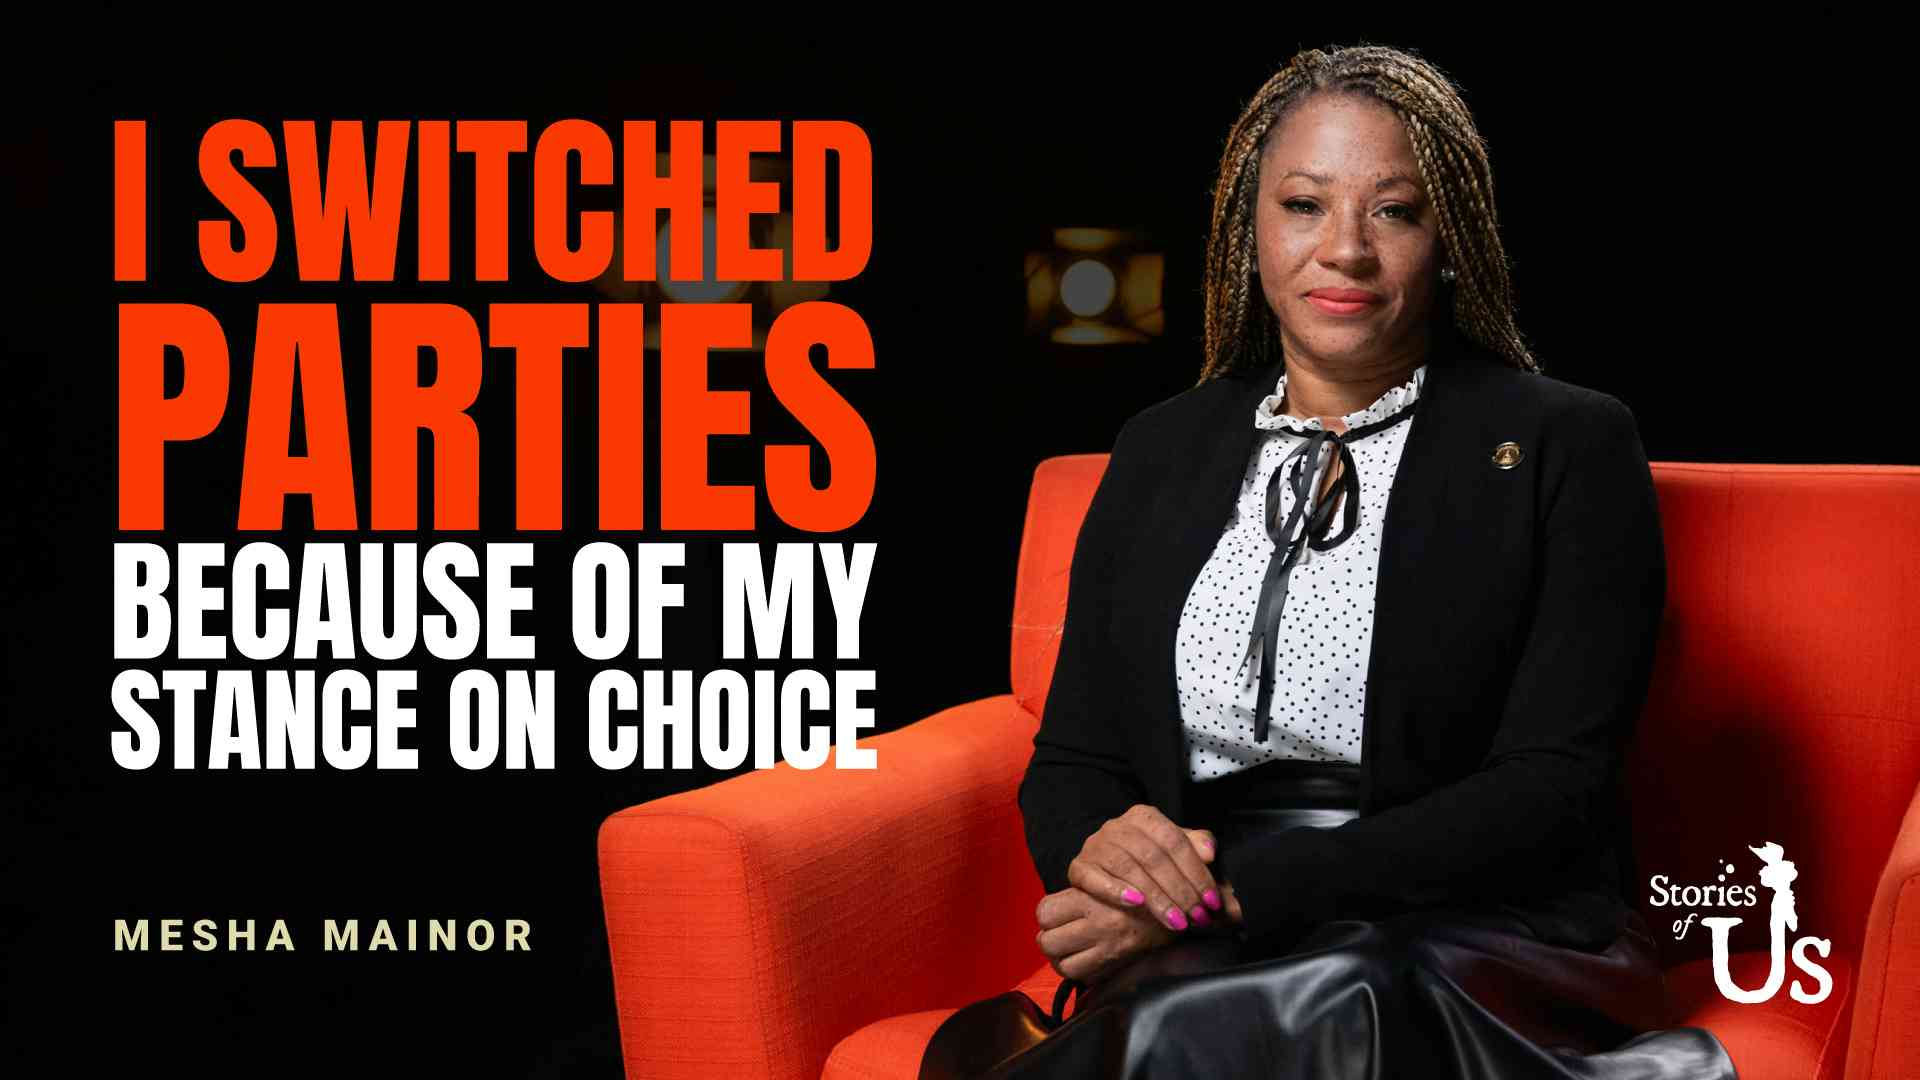 Mesha Mainor: I Switched Parties Because of My Stance on Choice